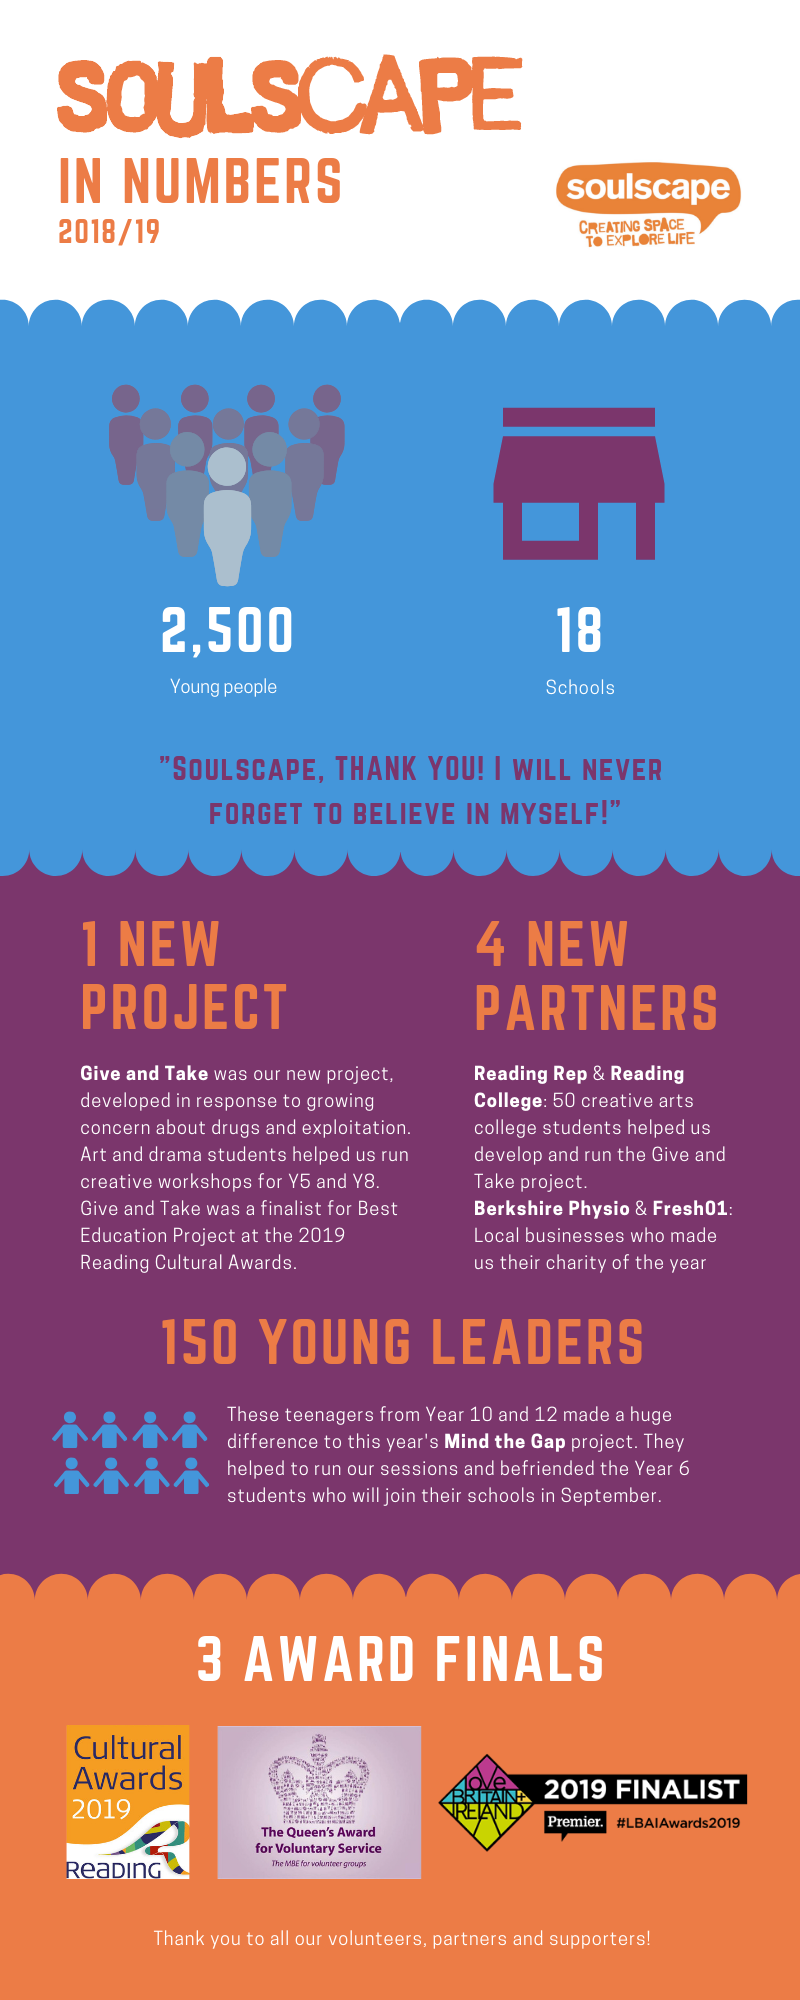 Soulscape in numbers infographic